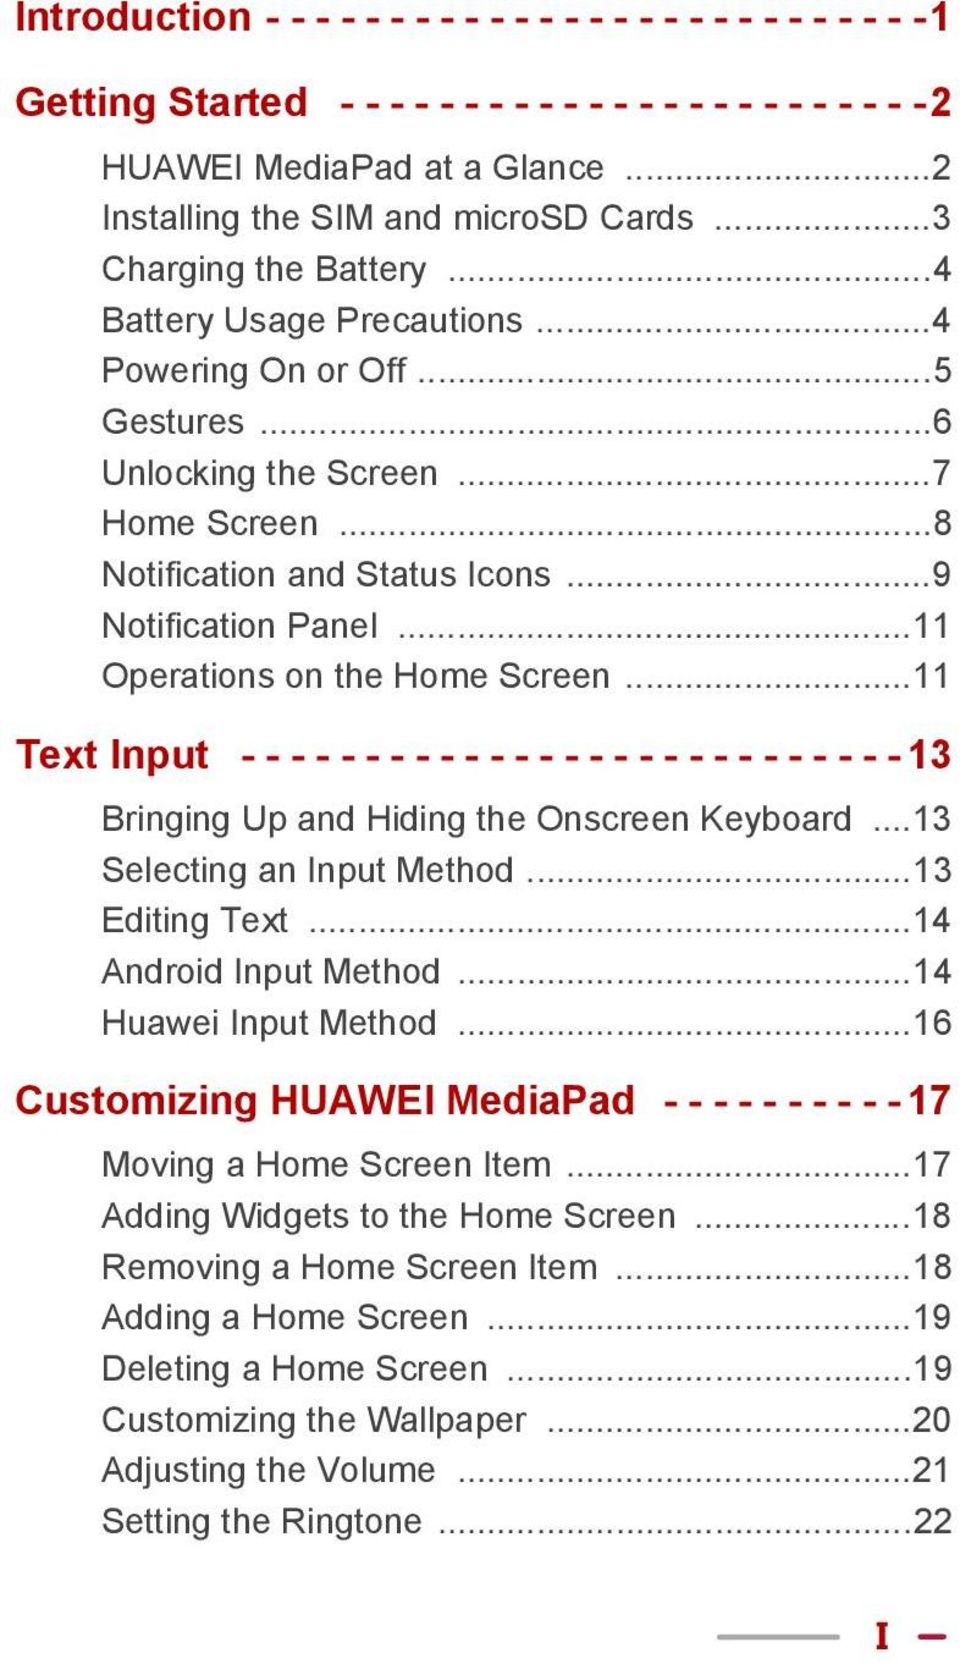 ..11 Operations on the Home Screen...11 Text Input - - - - - - - - - - - - - - - - - - - - - - - - - - - 13 Bringing Up and Hiding the Onscreen Keyboard...13 Selecting an Input Method...13 Editing Text.